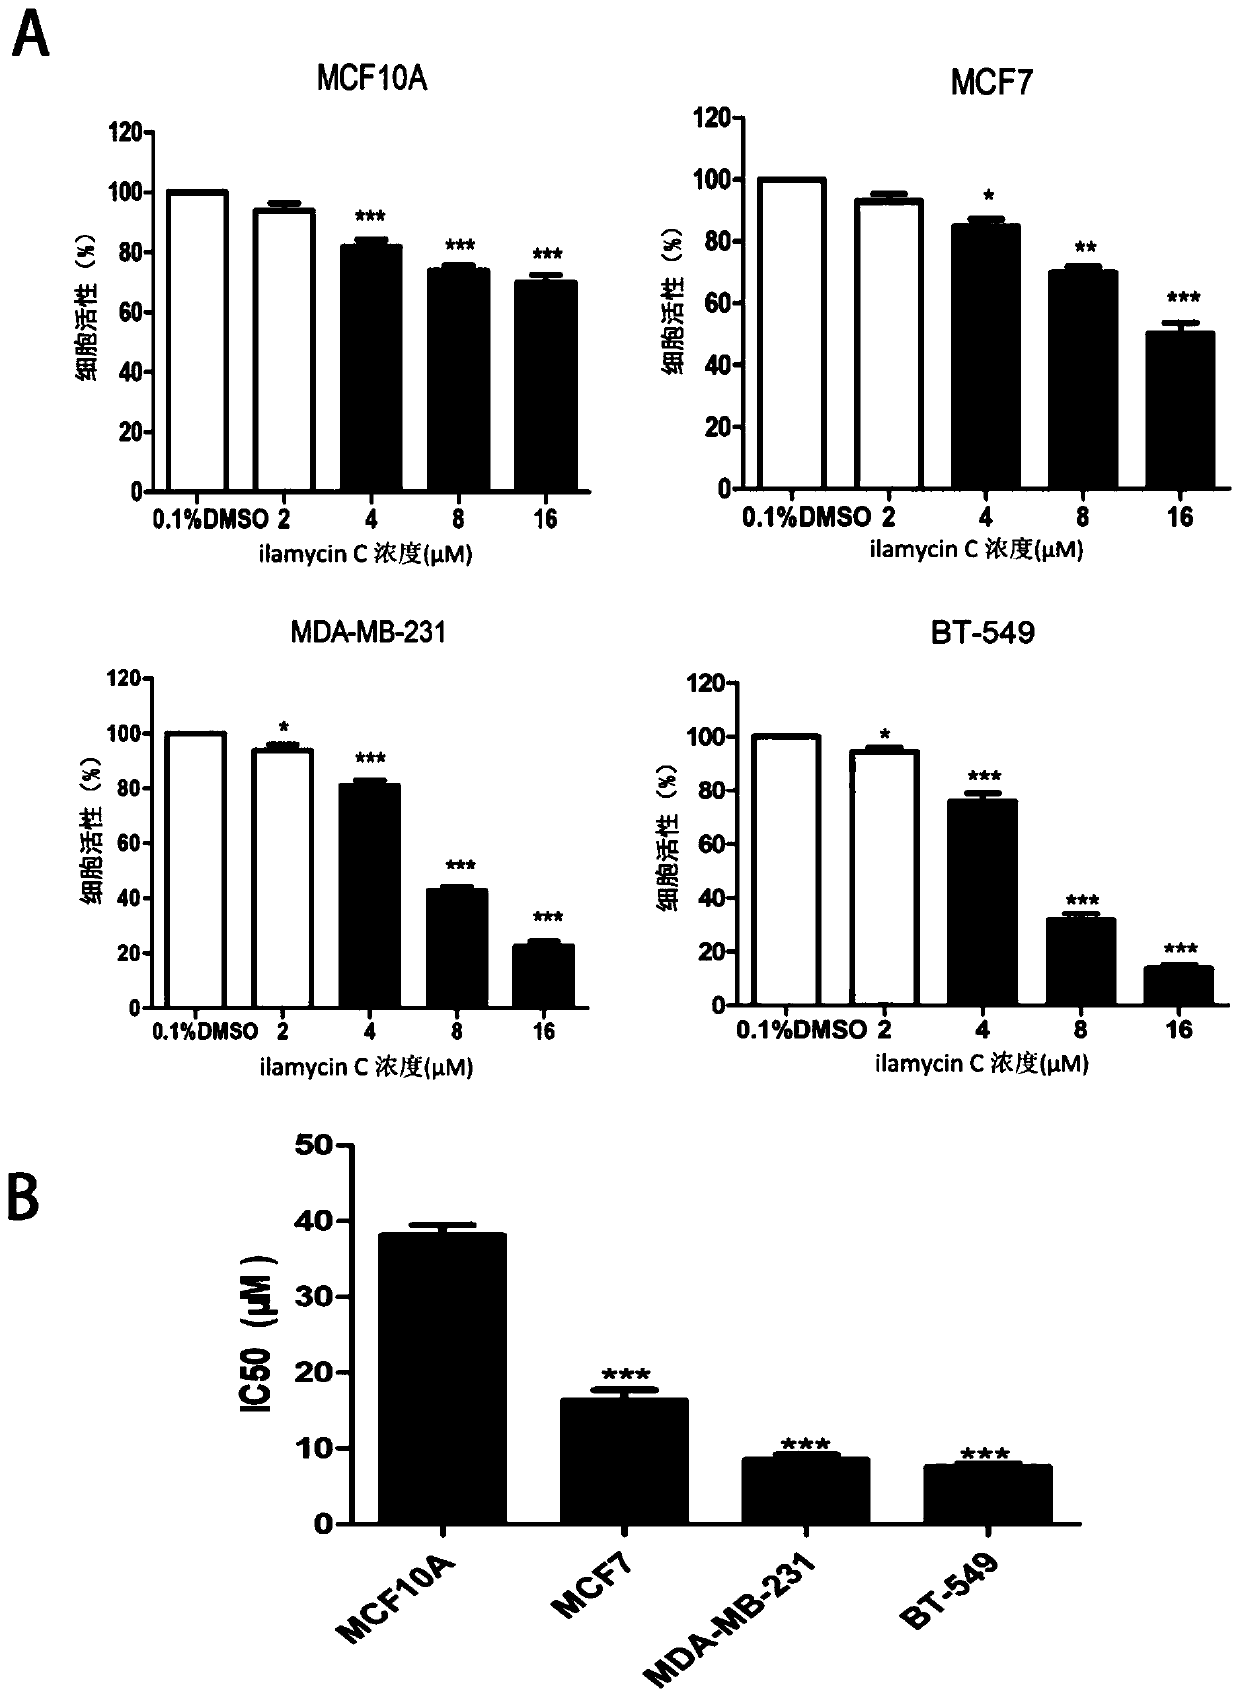 Application of compound ilamycin C and homologues thereof in preparation of drugs for treating triple negative breast cancer